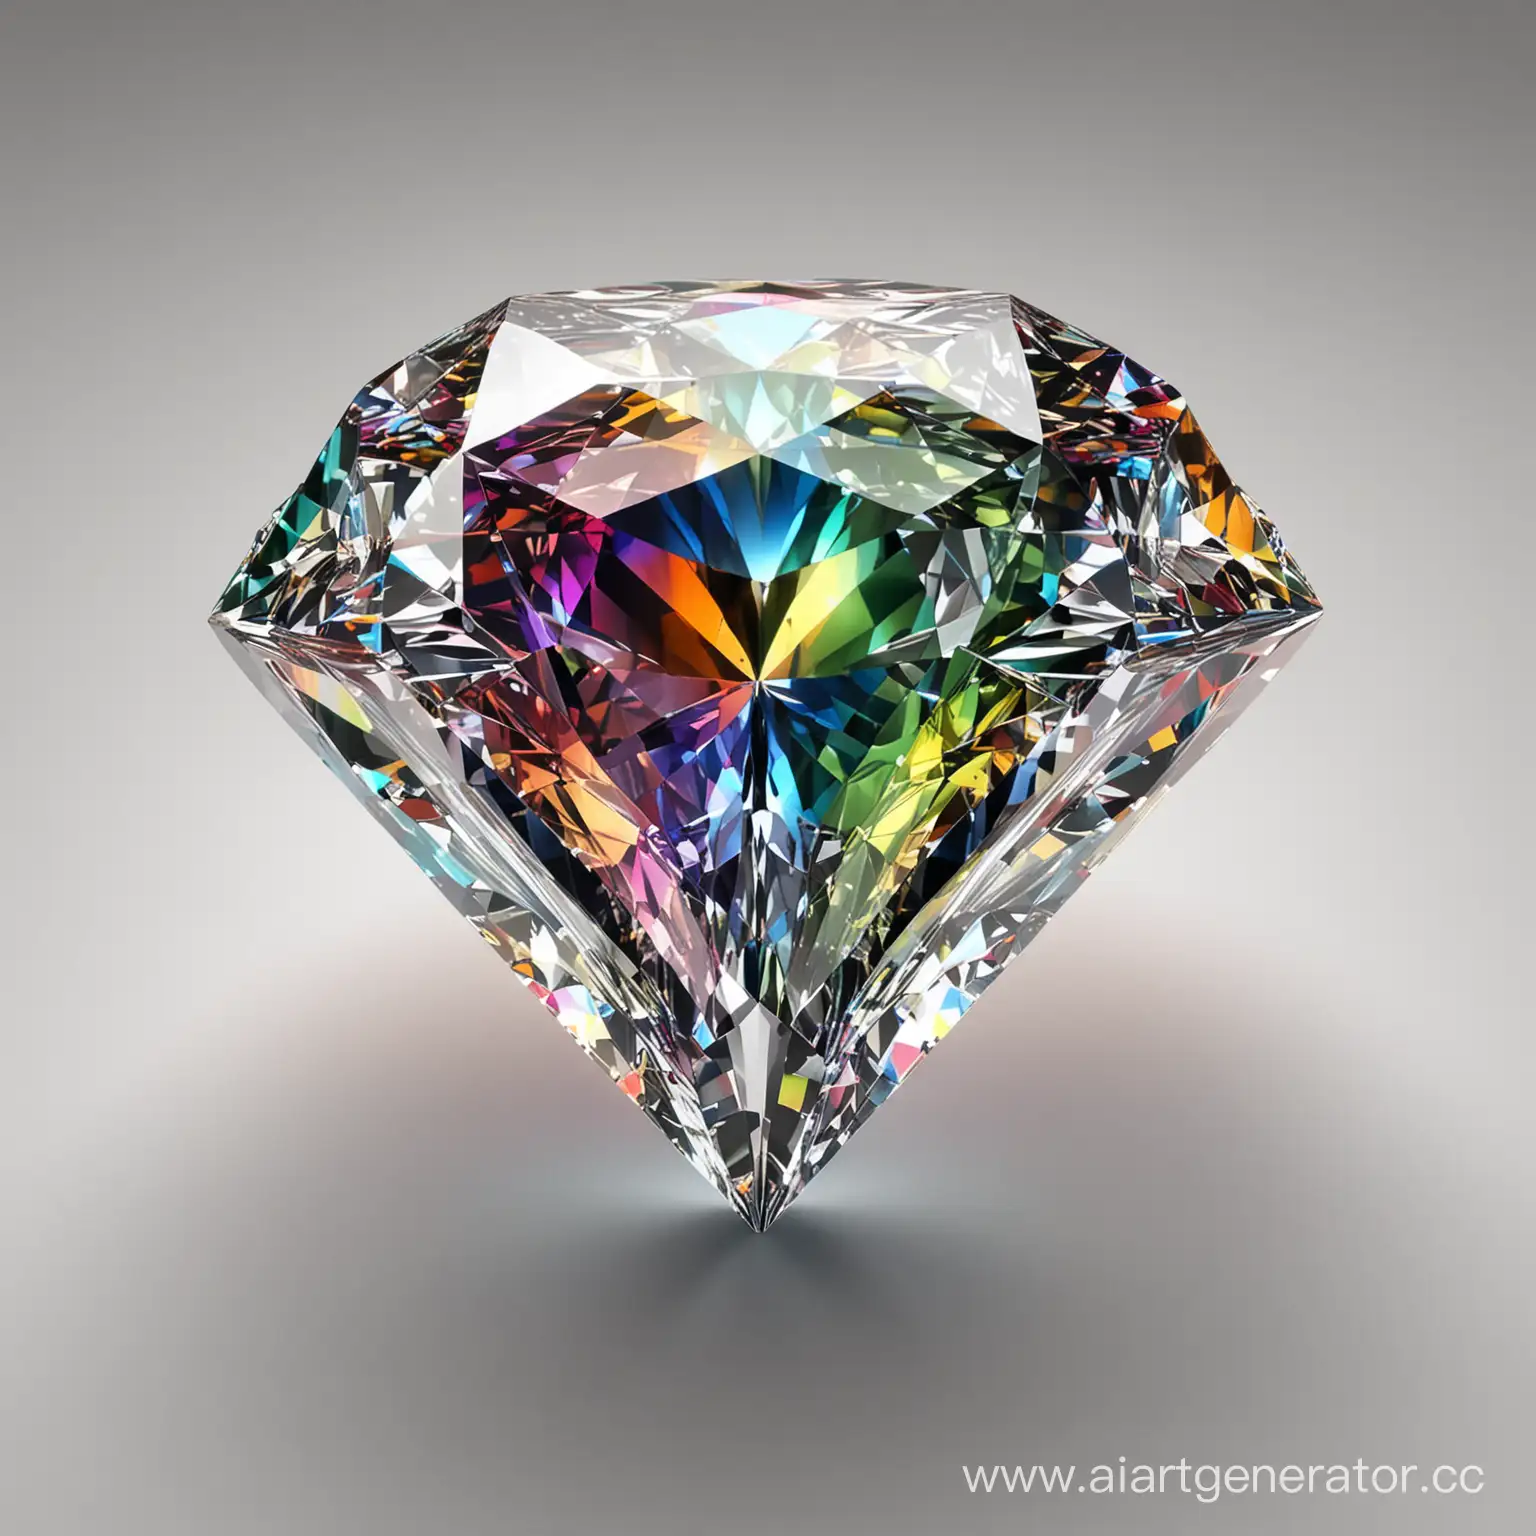 Luxury-Shimmering-Diamond-with-Rainbow-Facets-and-Excelsior-Inscription